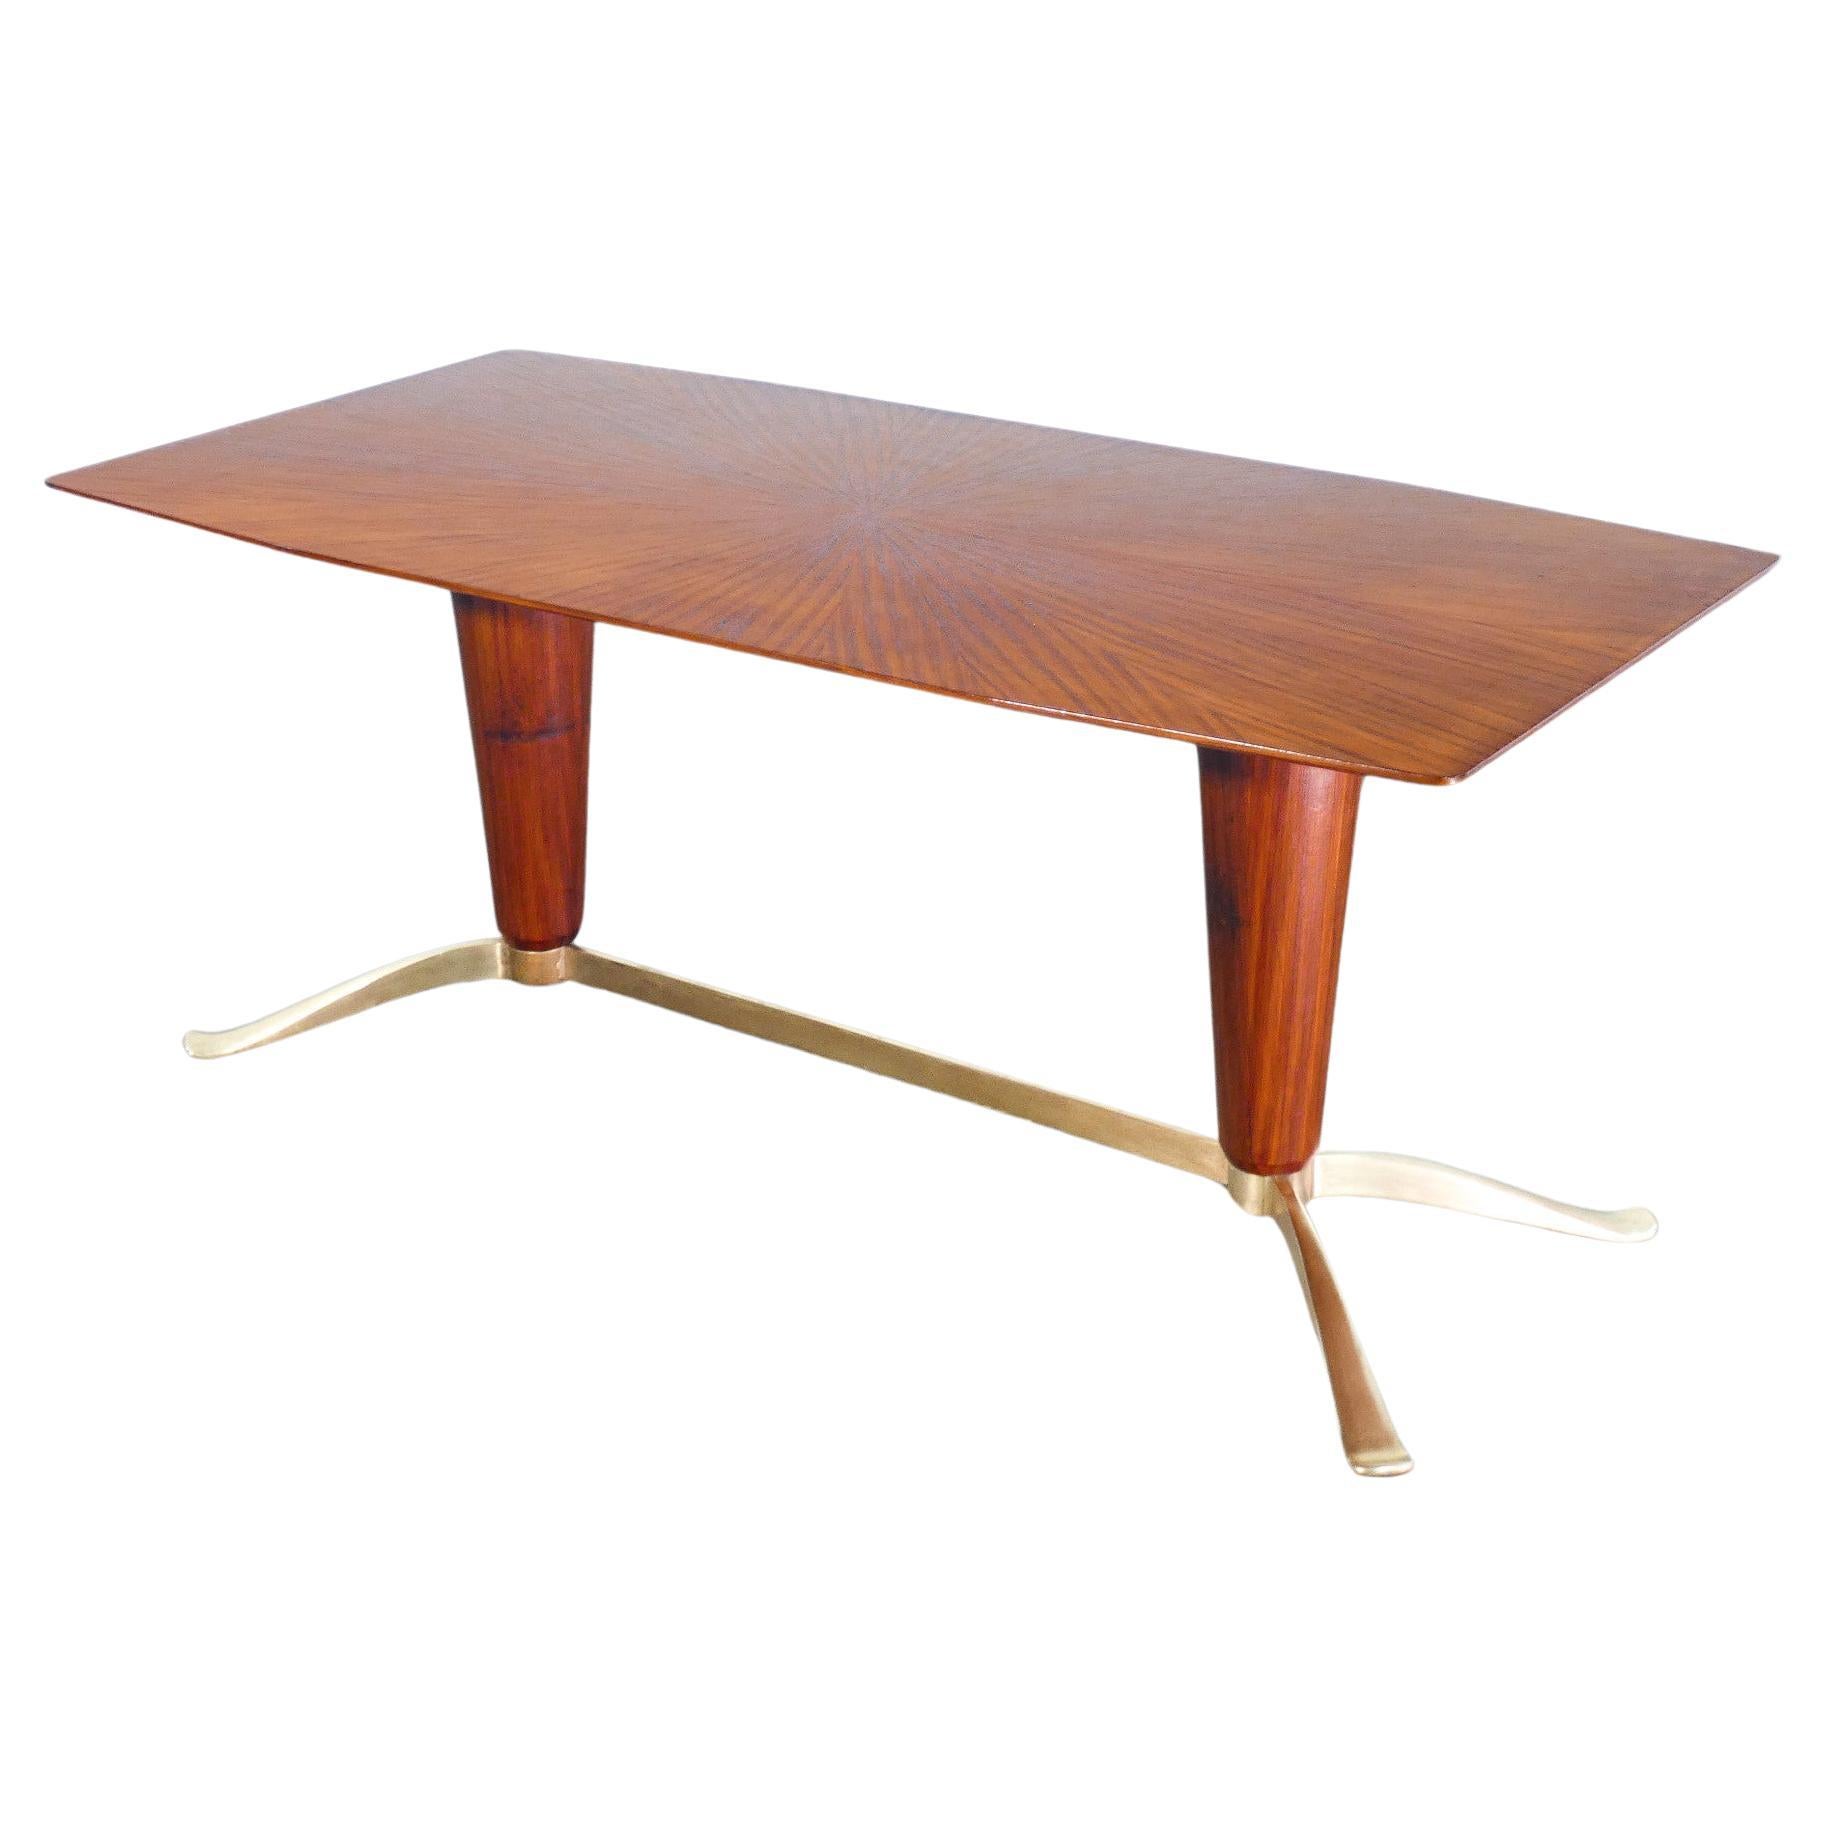 Italian design table from the 1940s attributed to the hand of Paolo BUFFA